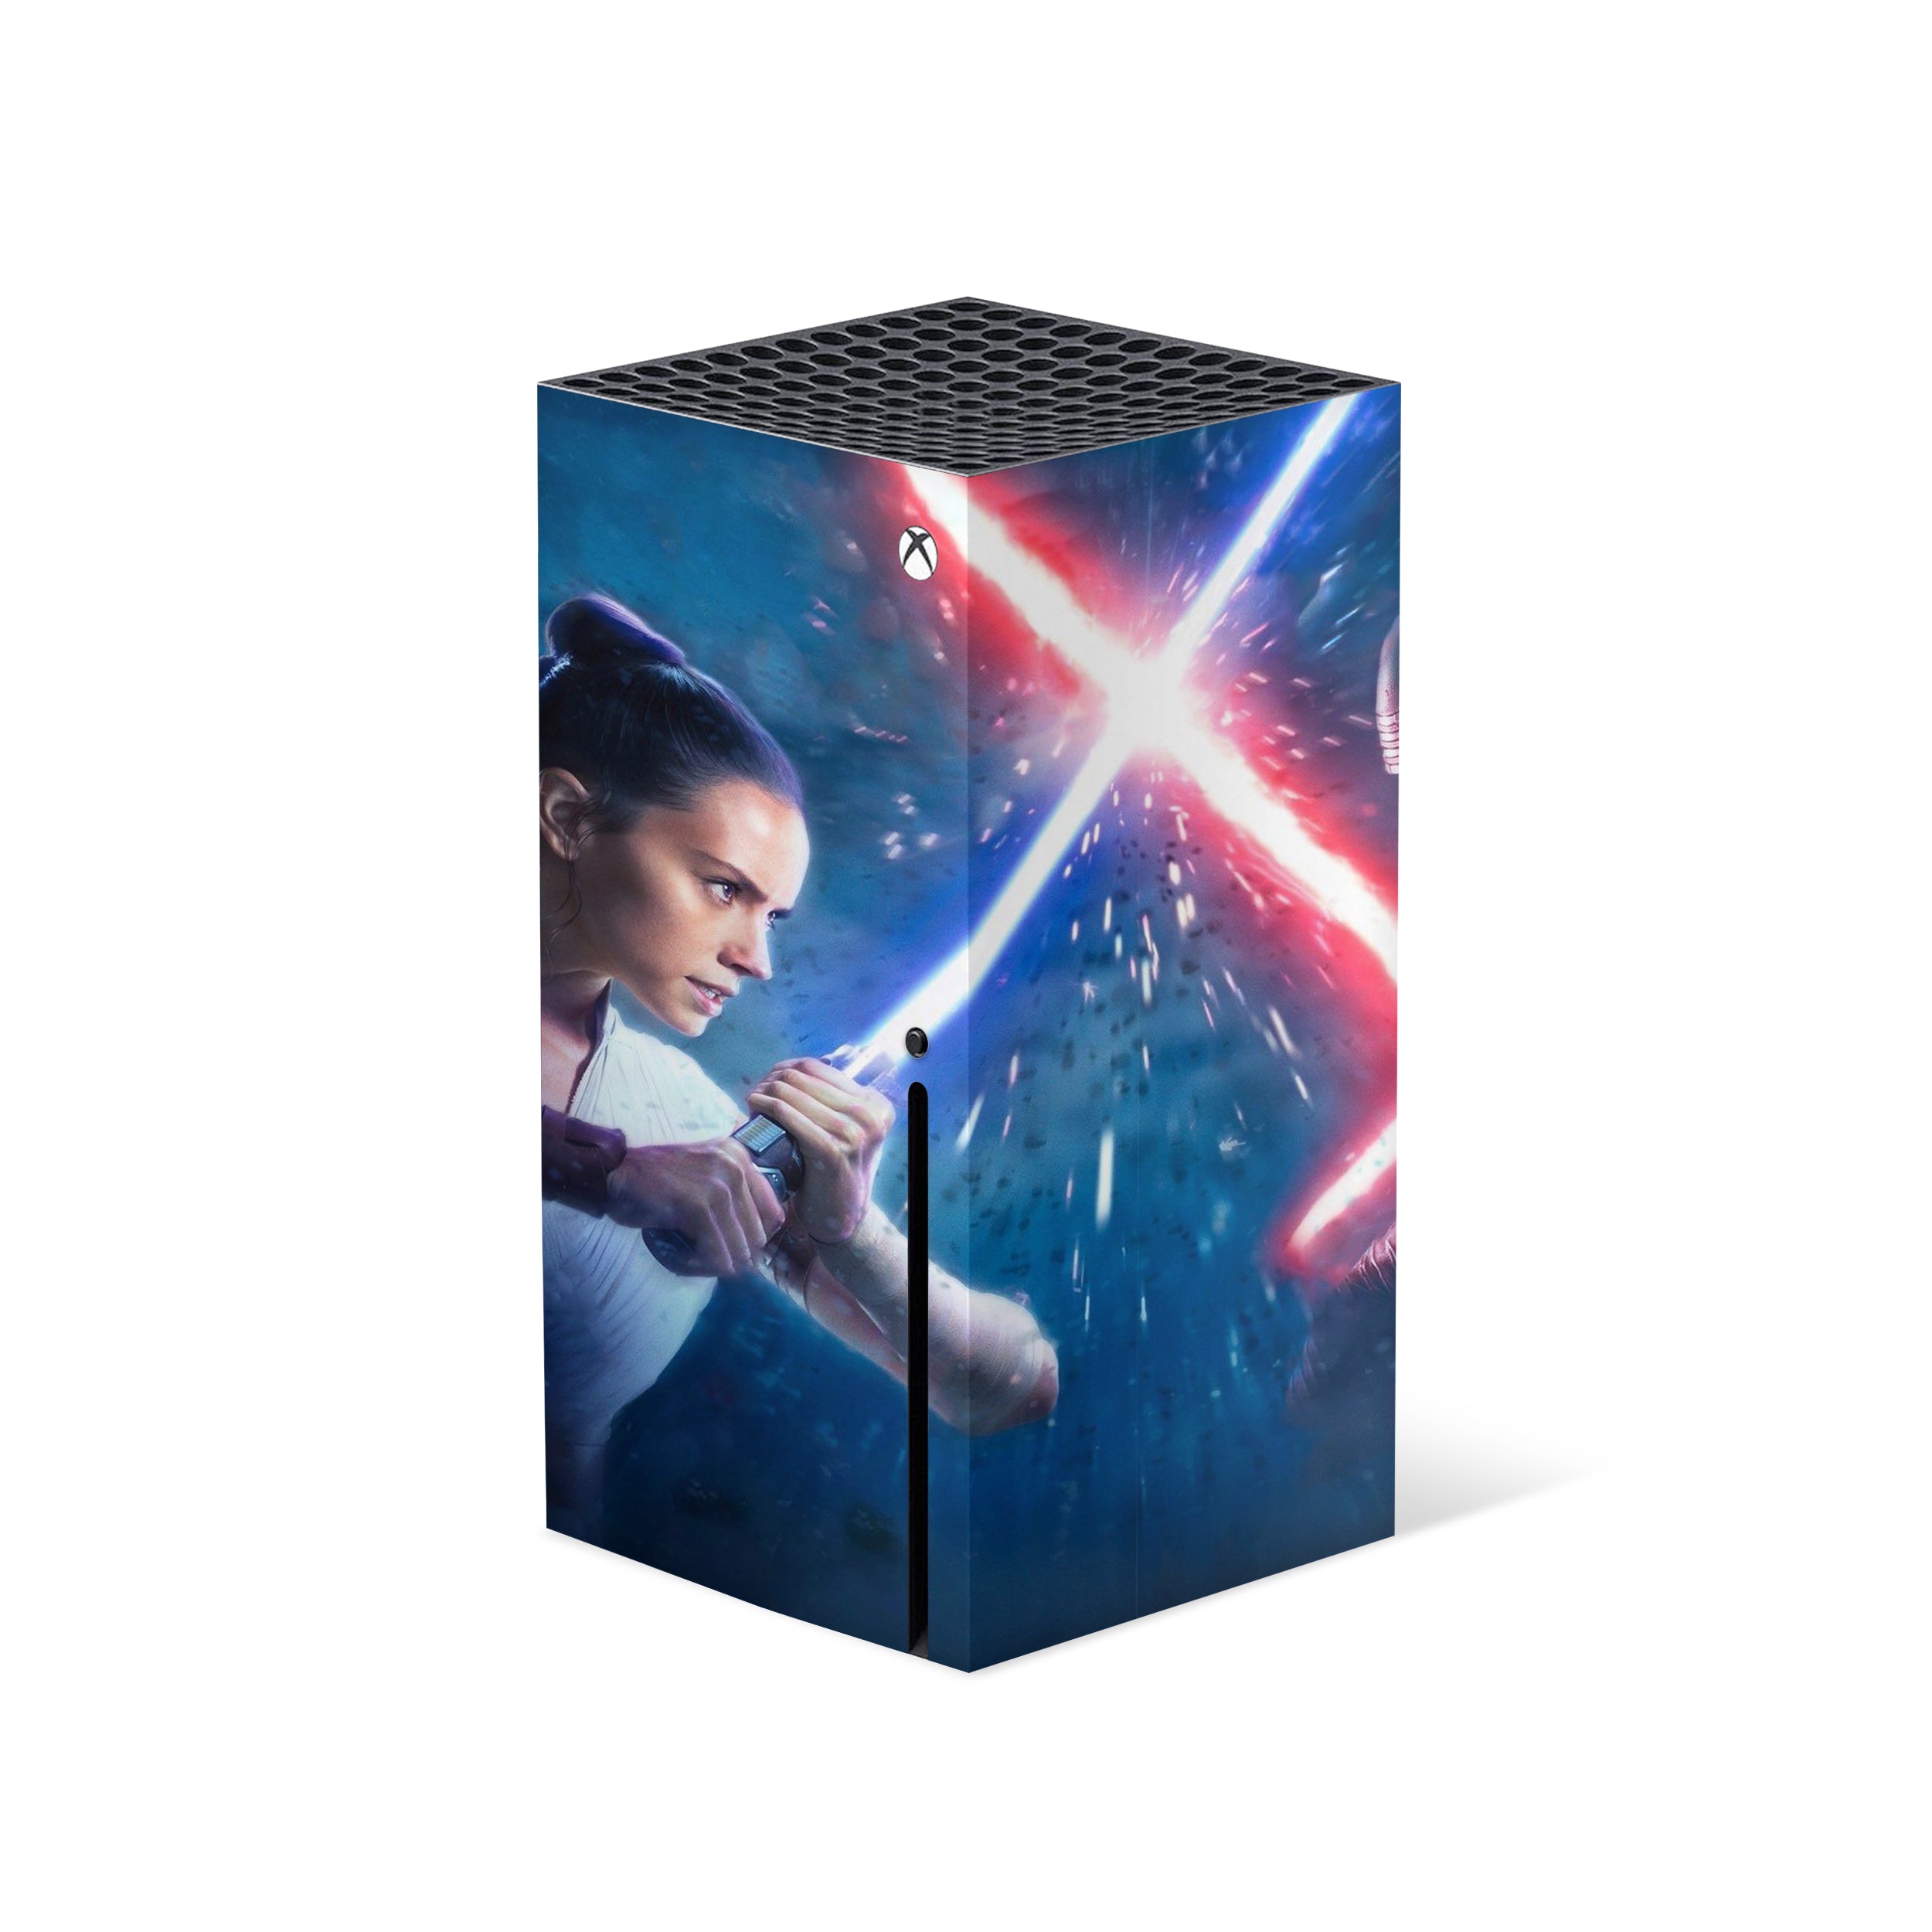 A video game skin featuring a Star Wars Rey Kylo Ren design for the Xbox Series X.